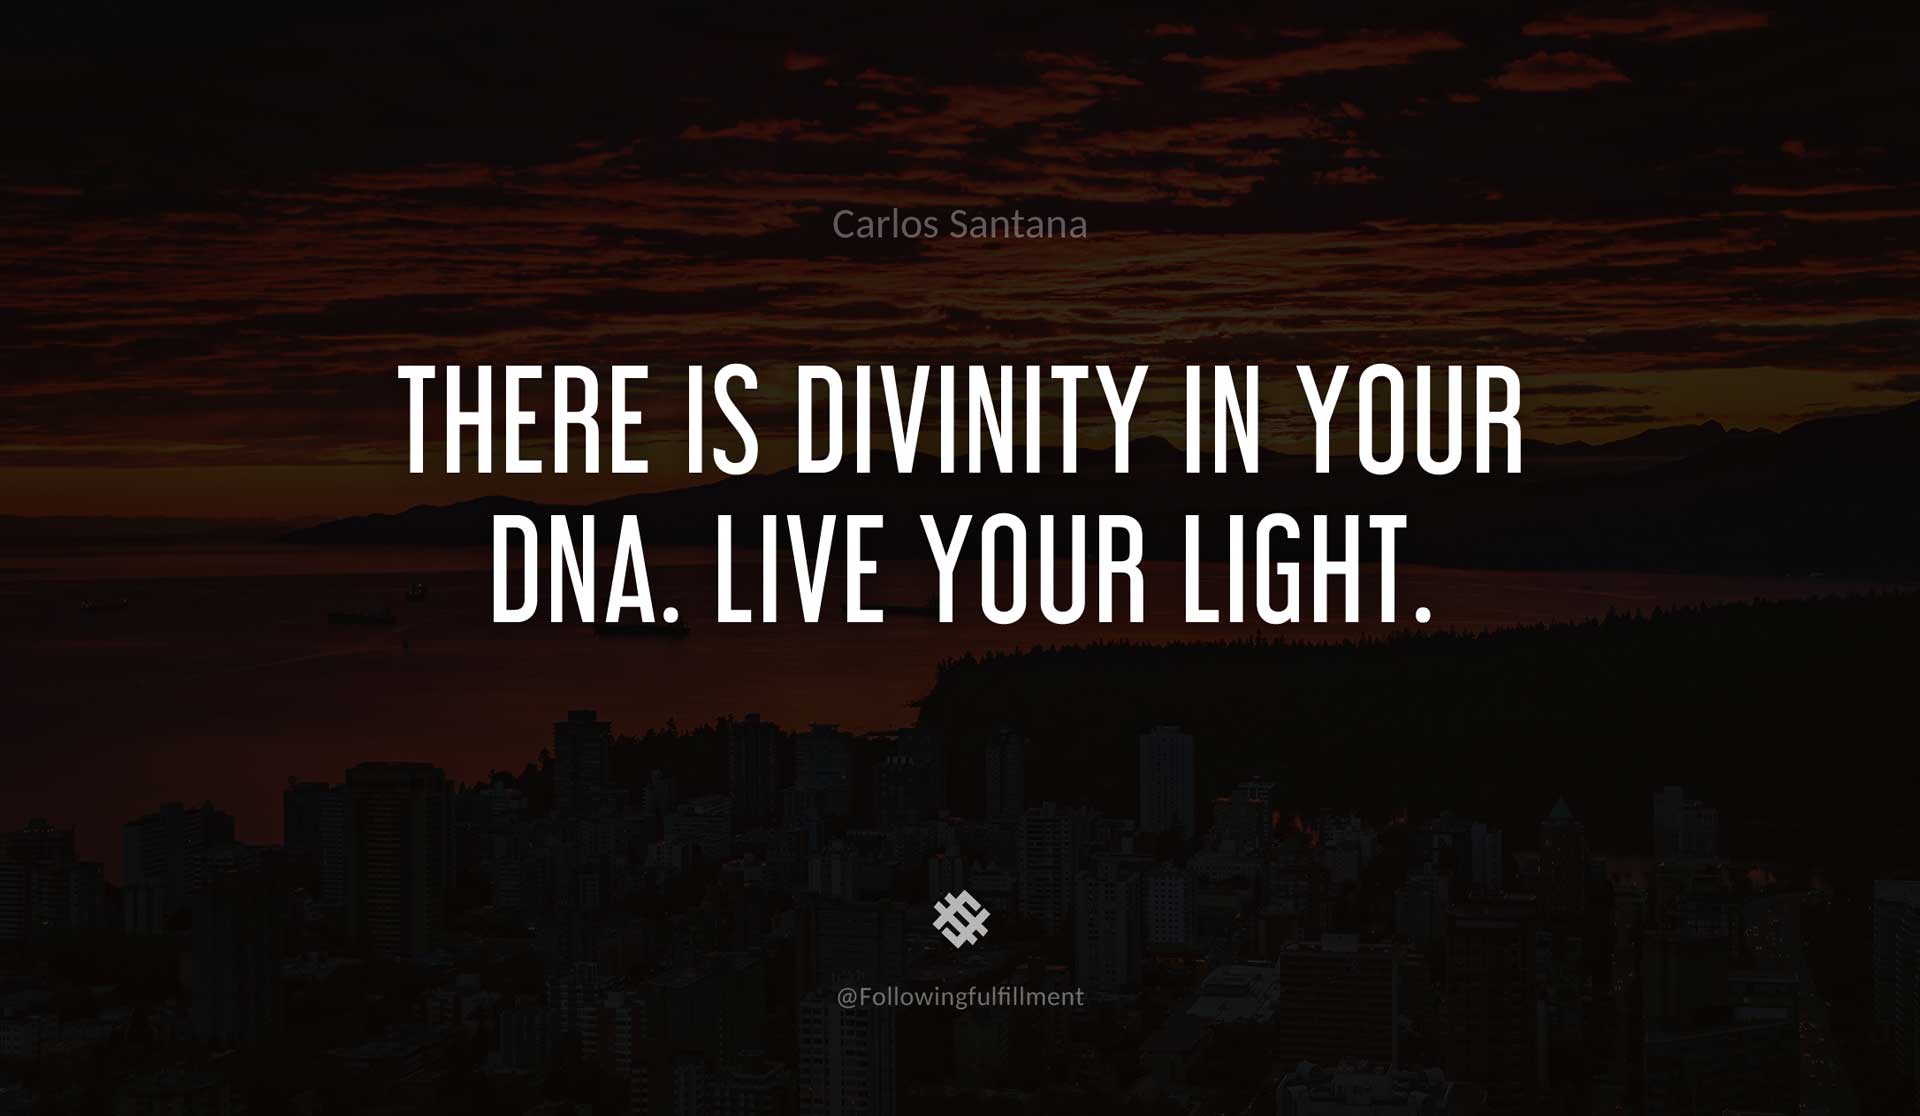 There-is-divinity-in-your-DNA.-Live-your-light.-CARLOS-SANTANA-Quote.jpg